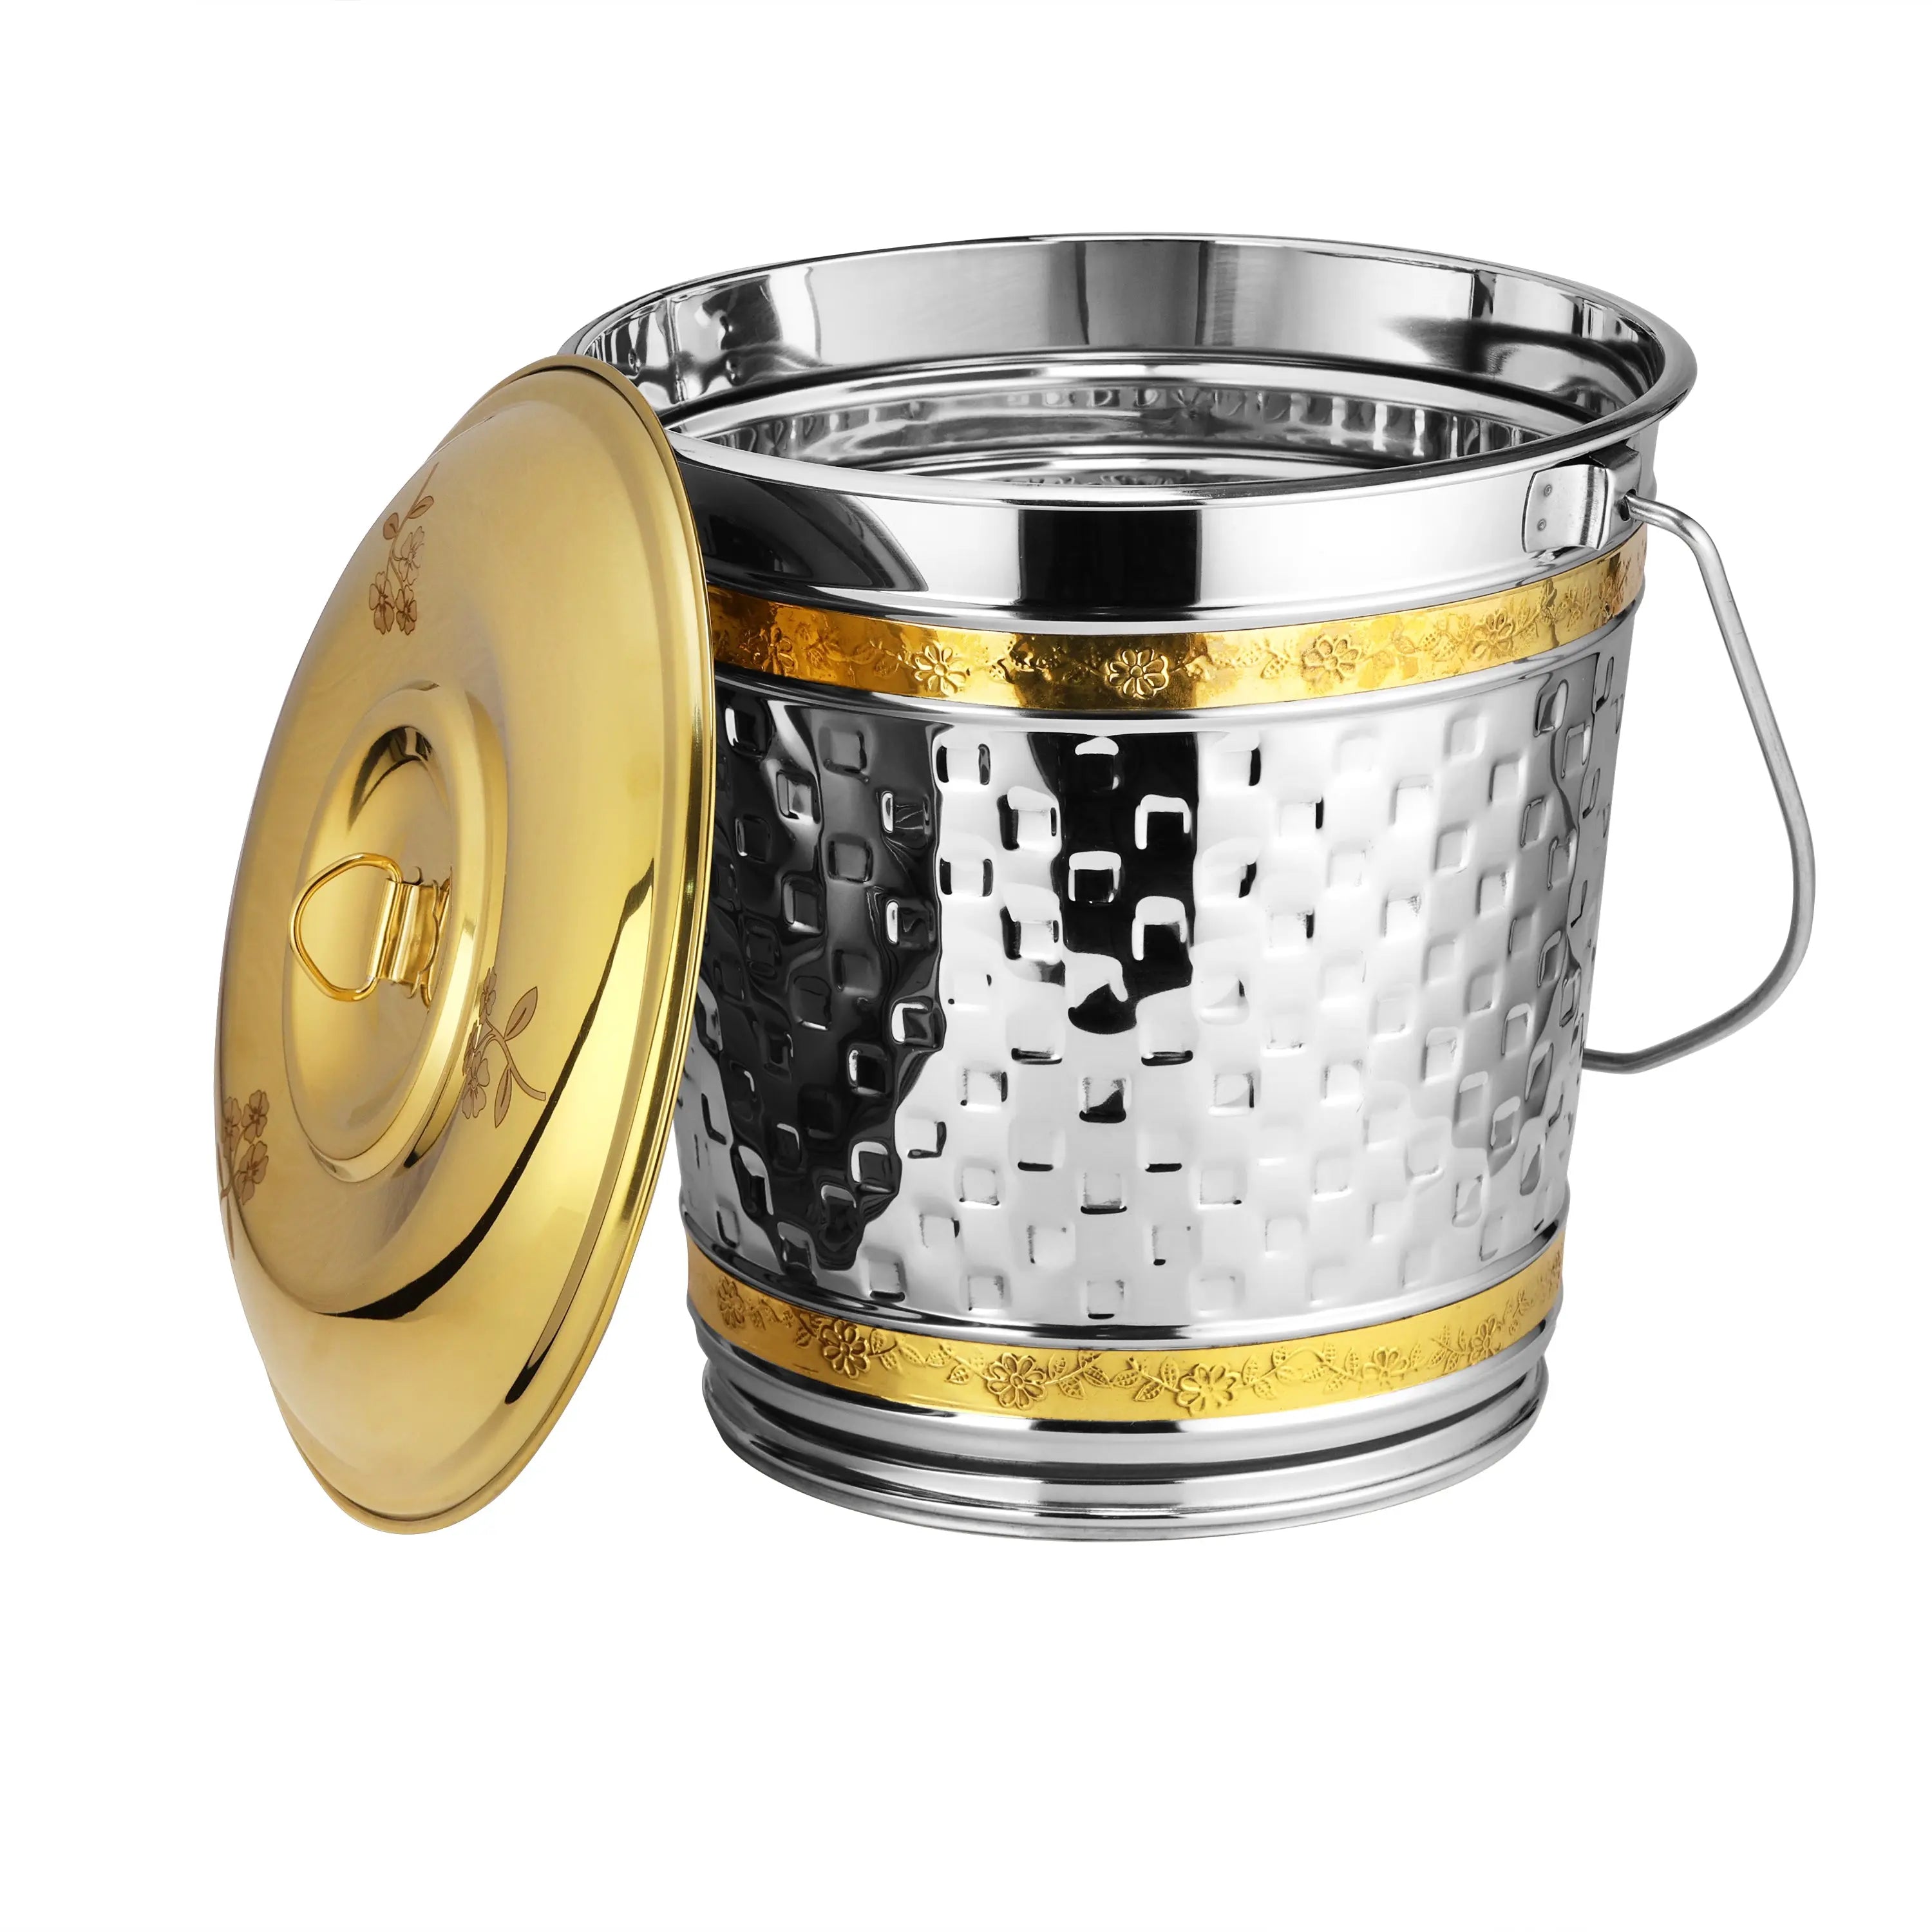 STAINLESS STEEL PVD CHESS BRASS BEADED BUCKET WITH LID - CROCKERY WALA AND COMPANY 